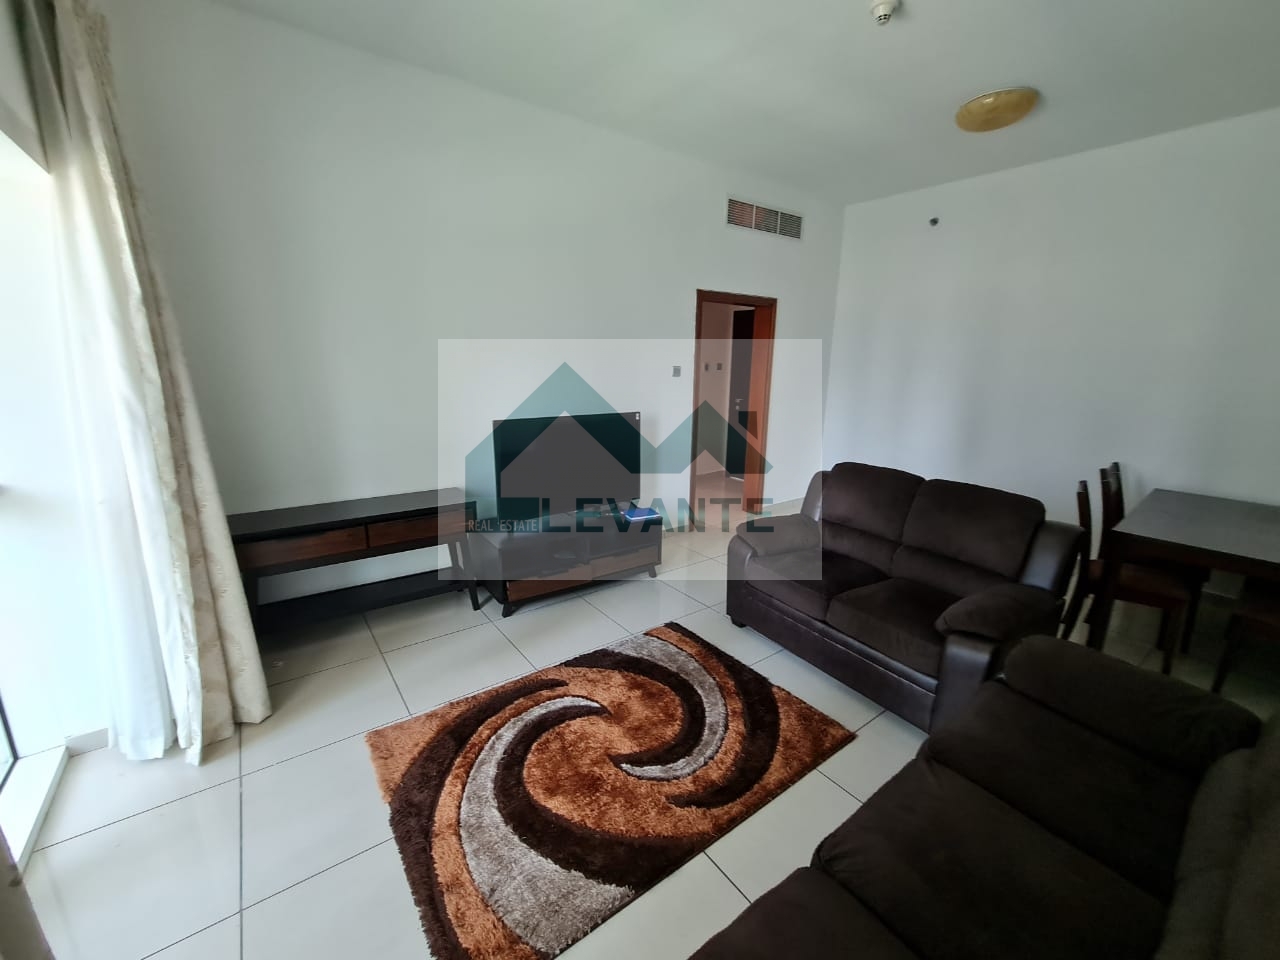 SPACIOUS 1B/R FULLY FURNISHED 8K MONTHLY ALL BILLS